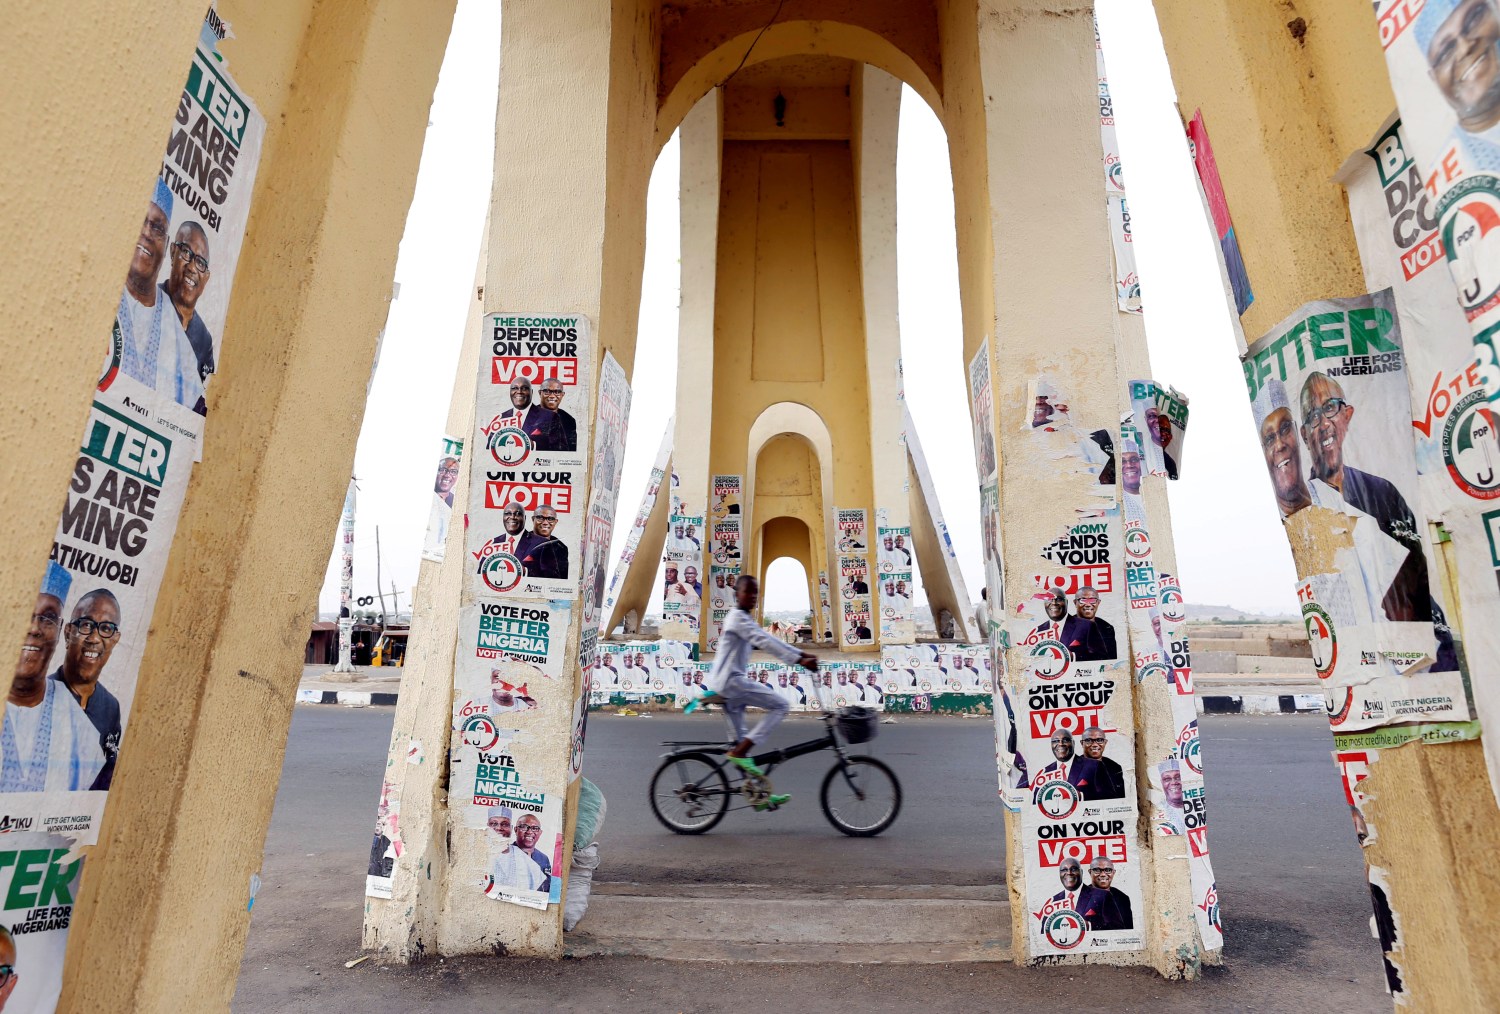 A boy rides a bicycle past a monument decorated with election posters depicting Nigeria's main opposition party presidential candidate Atiku Abubakar with his running mate, Peter Obi, in Yola, Adamawa State, Nigeria  February 26, 2019. REUTERS/Nyancho NwaNri     TPX IMAGES OF THE DAY - RC1BF60DDCA0